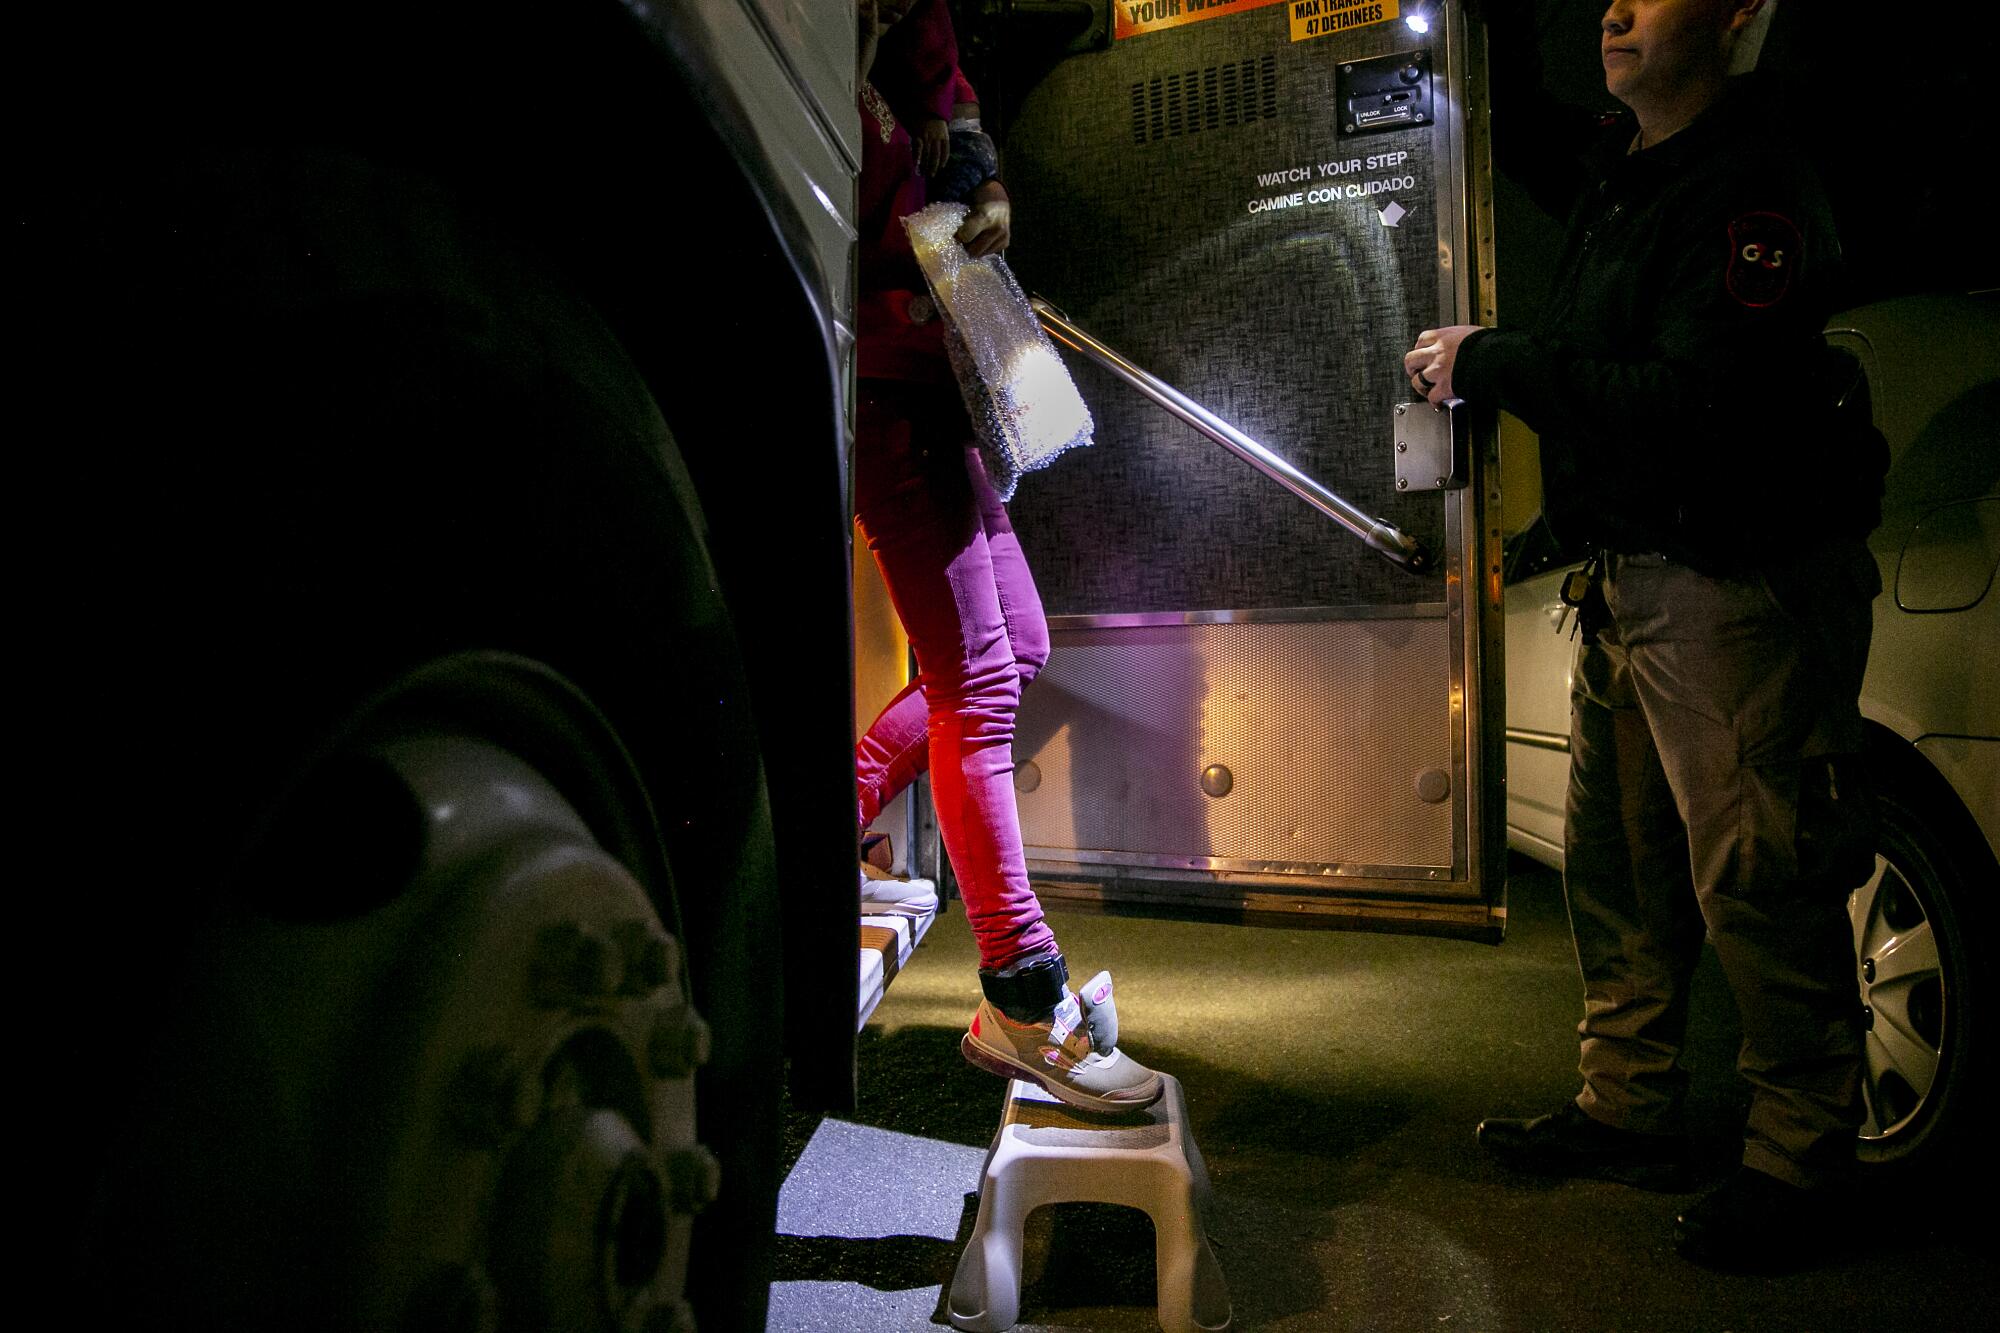 In January 2019, migrants wearing ankle monitors step off a bus at the Rapid Response Network's shelter